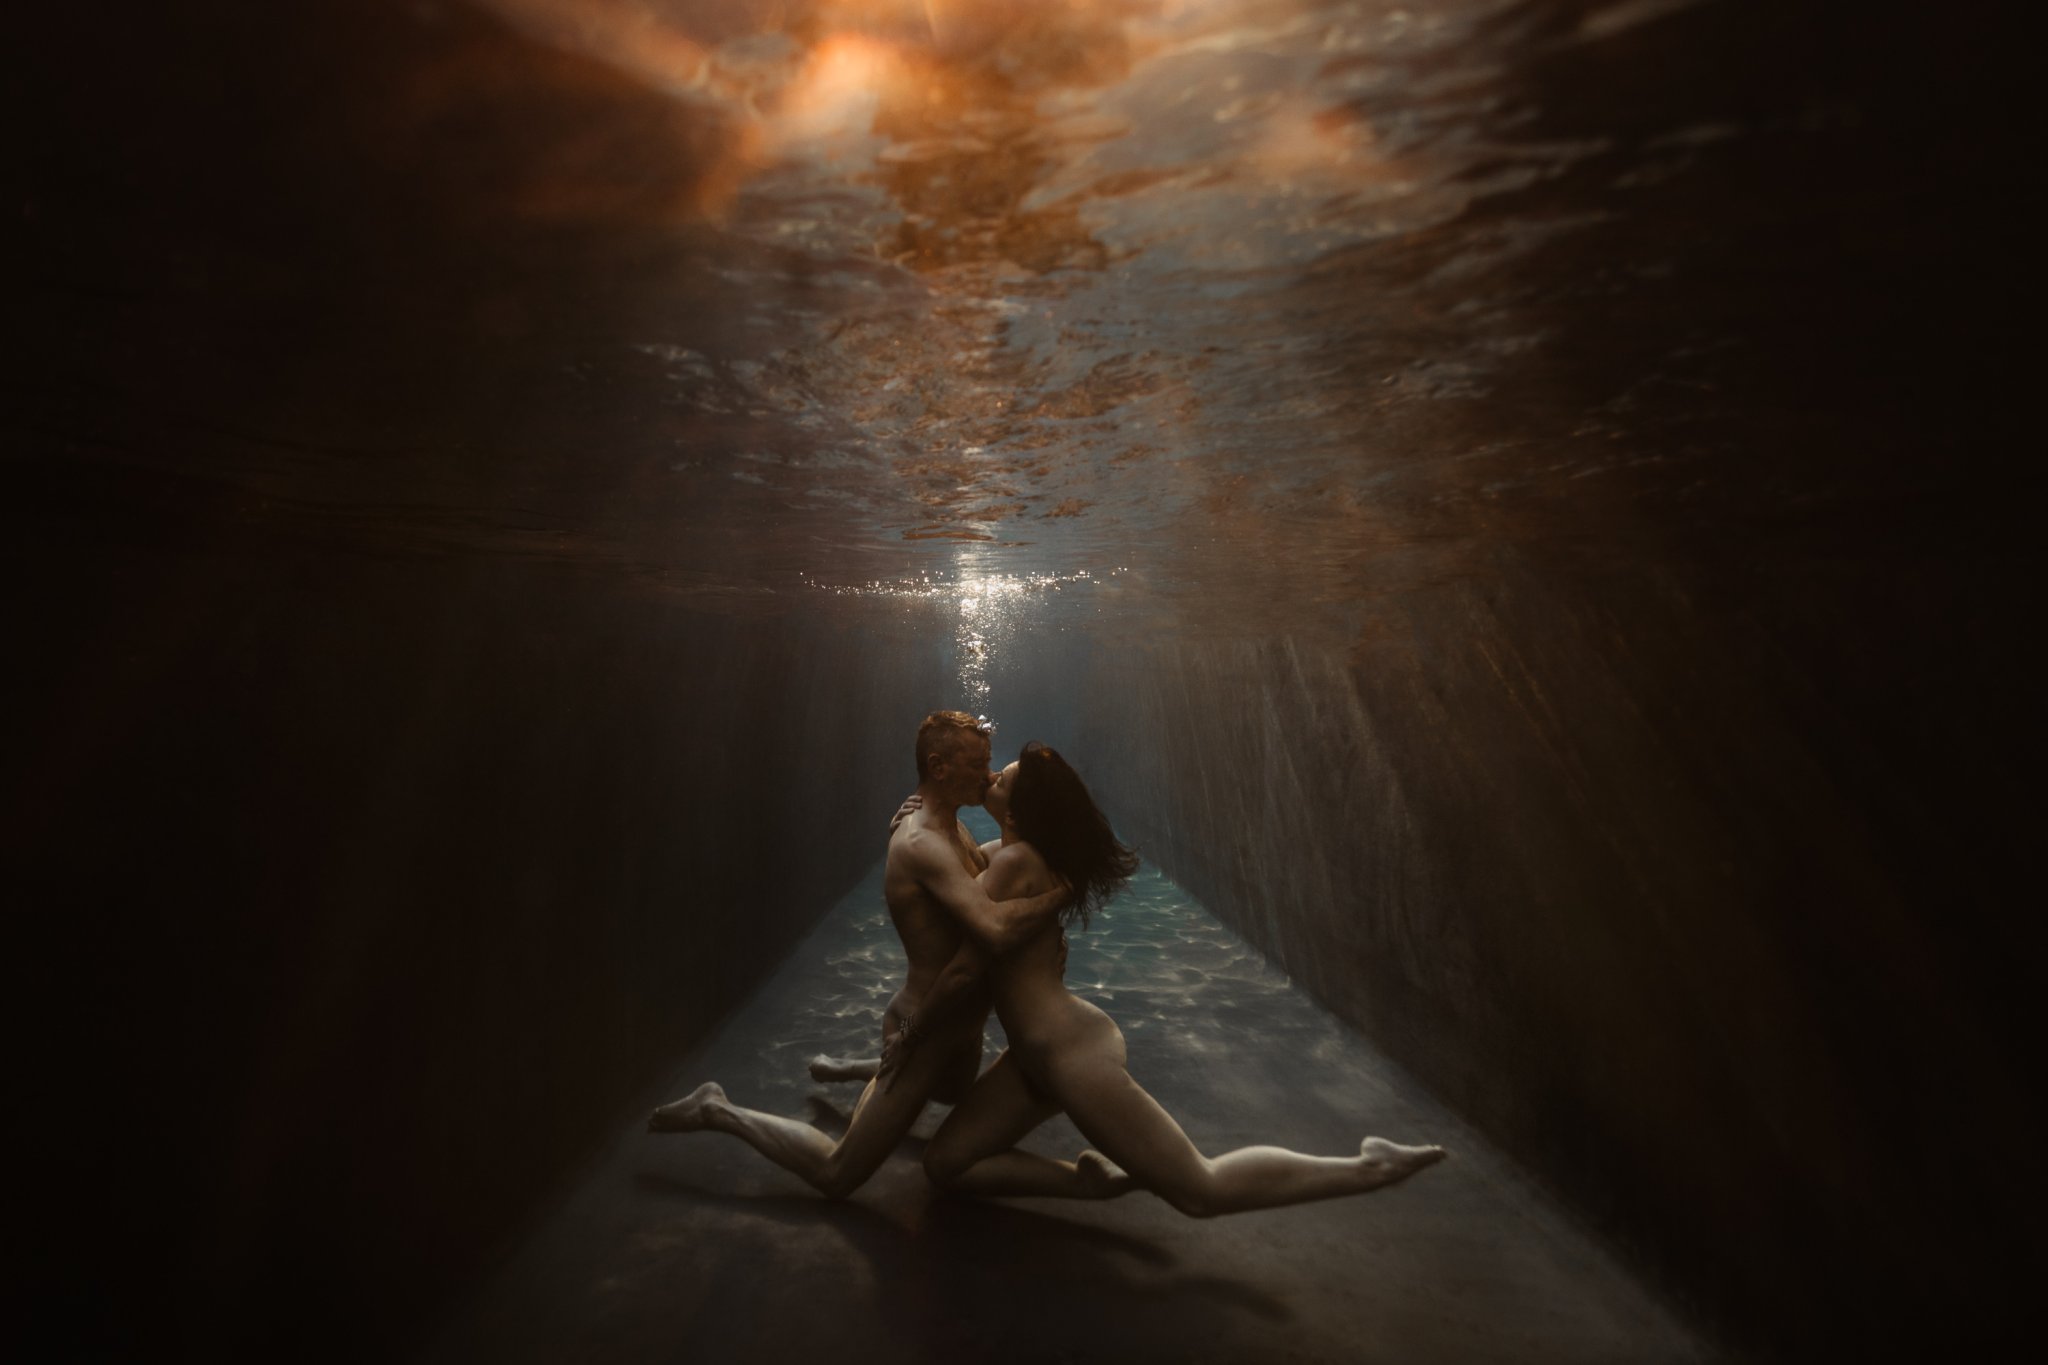 How Alison Bounce Makes Underwater Photos You'll Fall In Love With